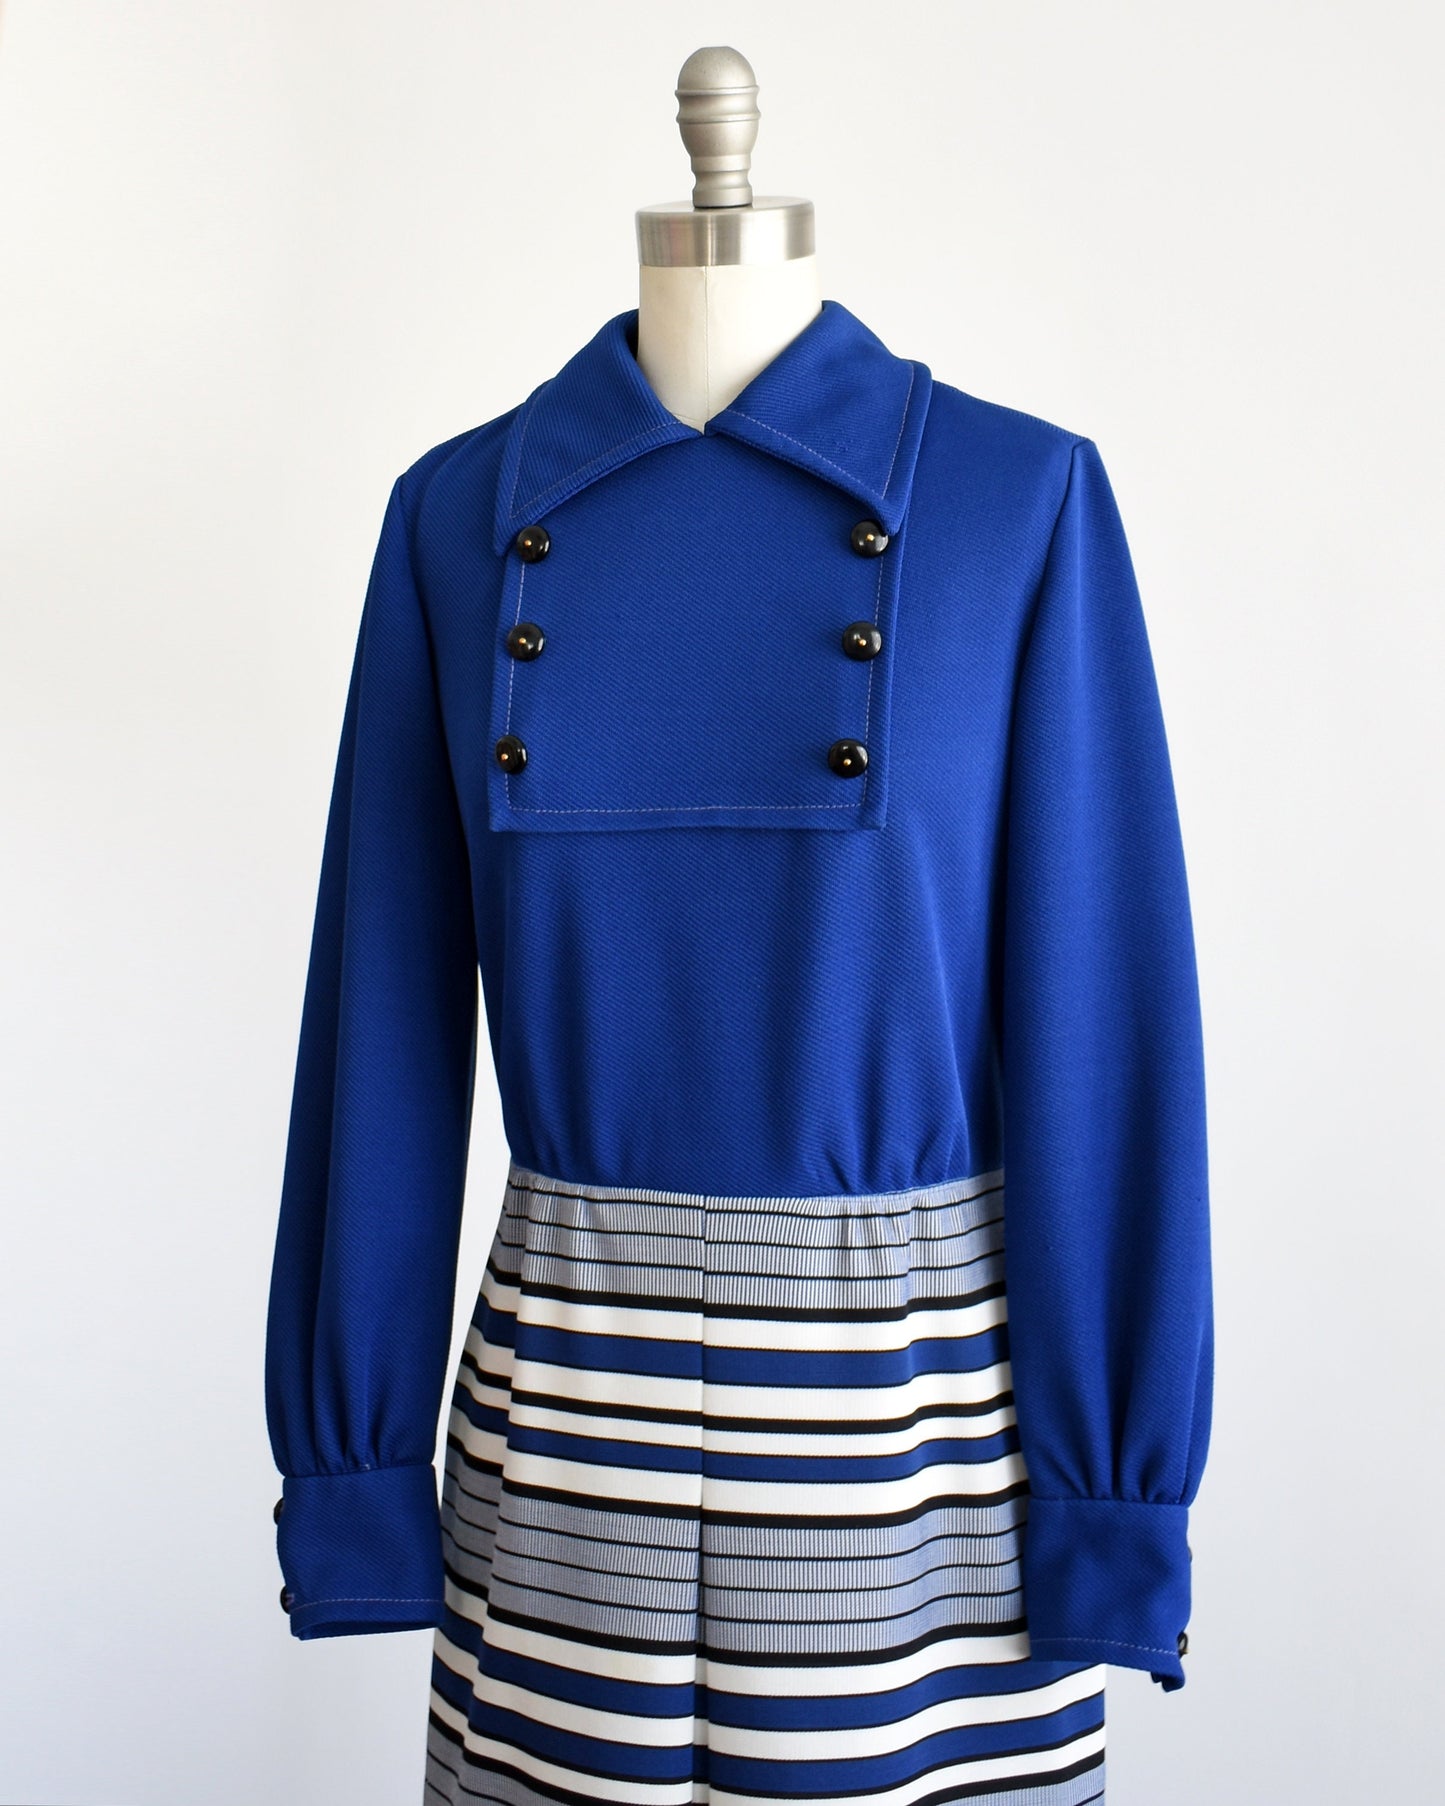 Side front view of a vintage 60s mod dress on a dress form. The dress has a dark blue bodice with a pointed collar and six decorative buttons in two rows of threes. Long sleeves. Blue, black, and white horizontal striped skirt with a front pleat.